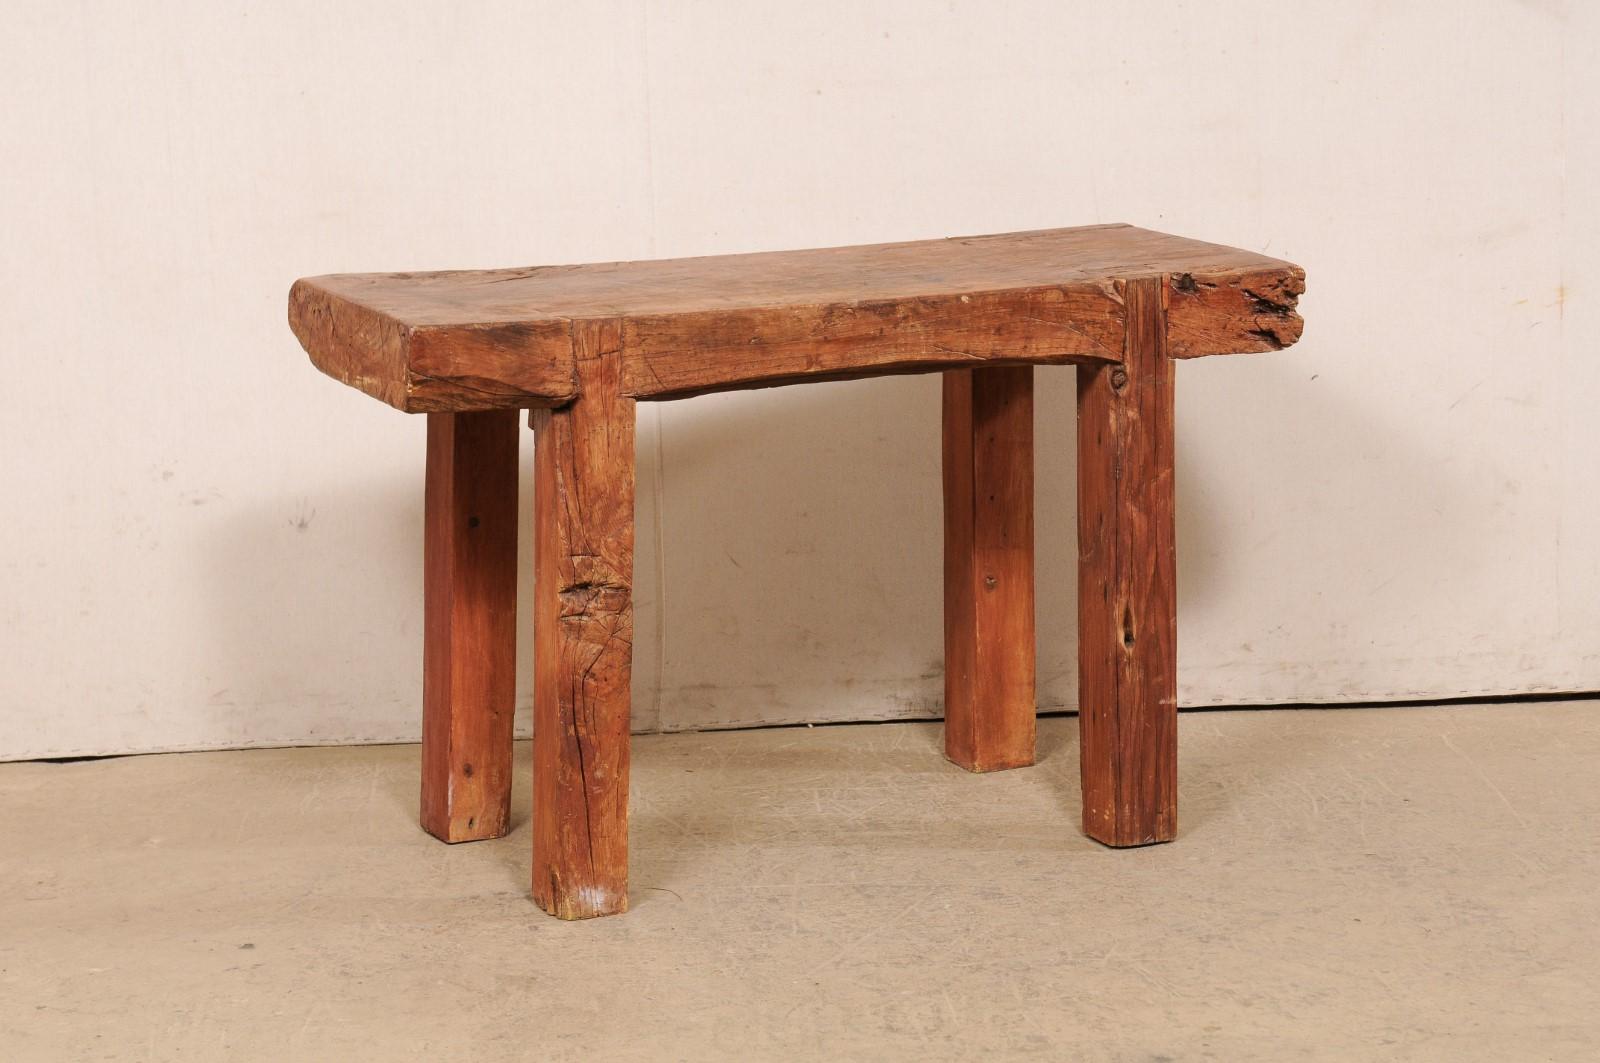 A vintage chopping-block style table from Asia. This rustic table features a thick single, rectangular-shaped slab/chopping block top, which is raised on four, thickly squared legs. The wood has a lovely areas of natural knots, an aged patina